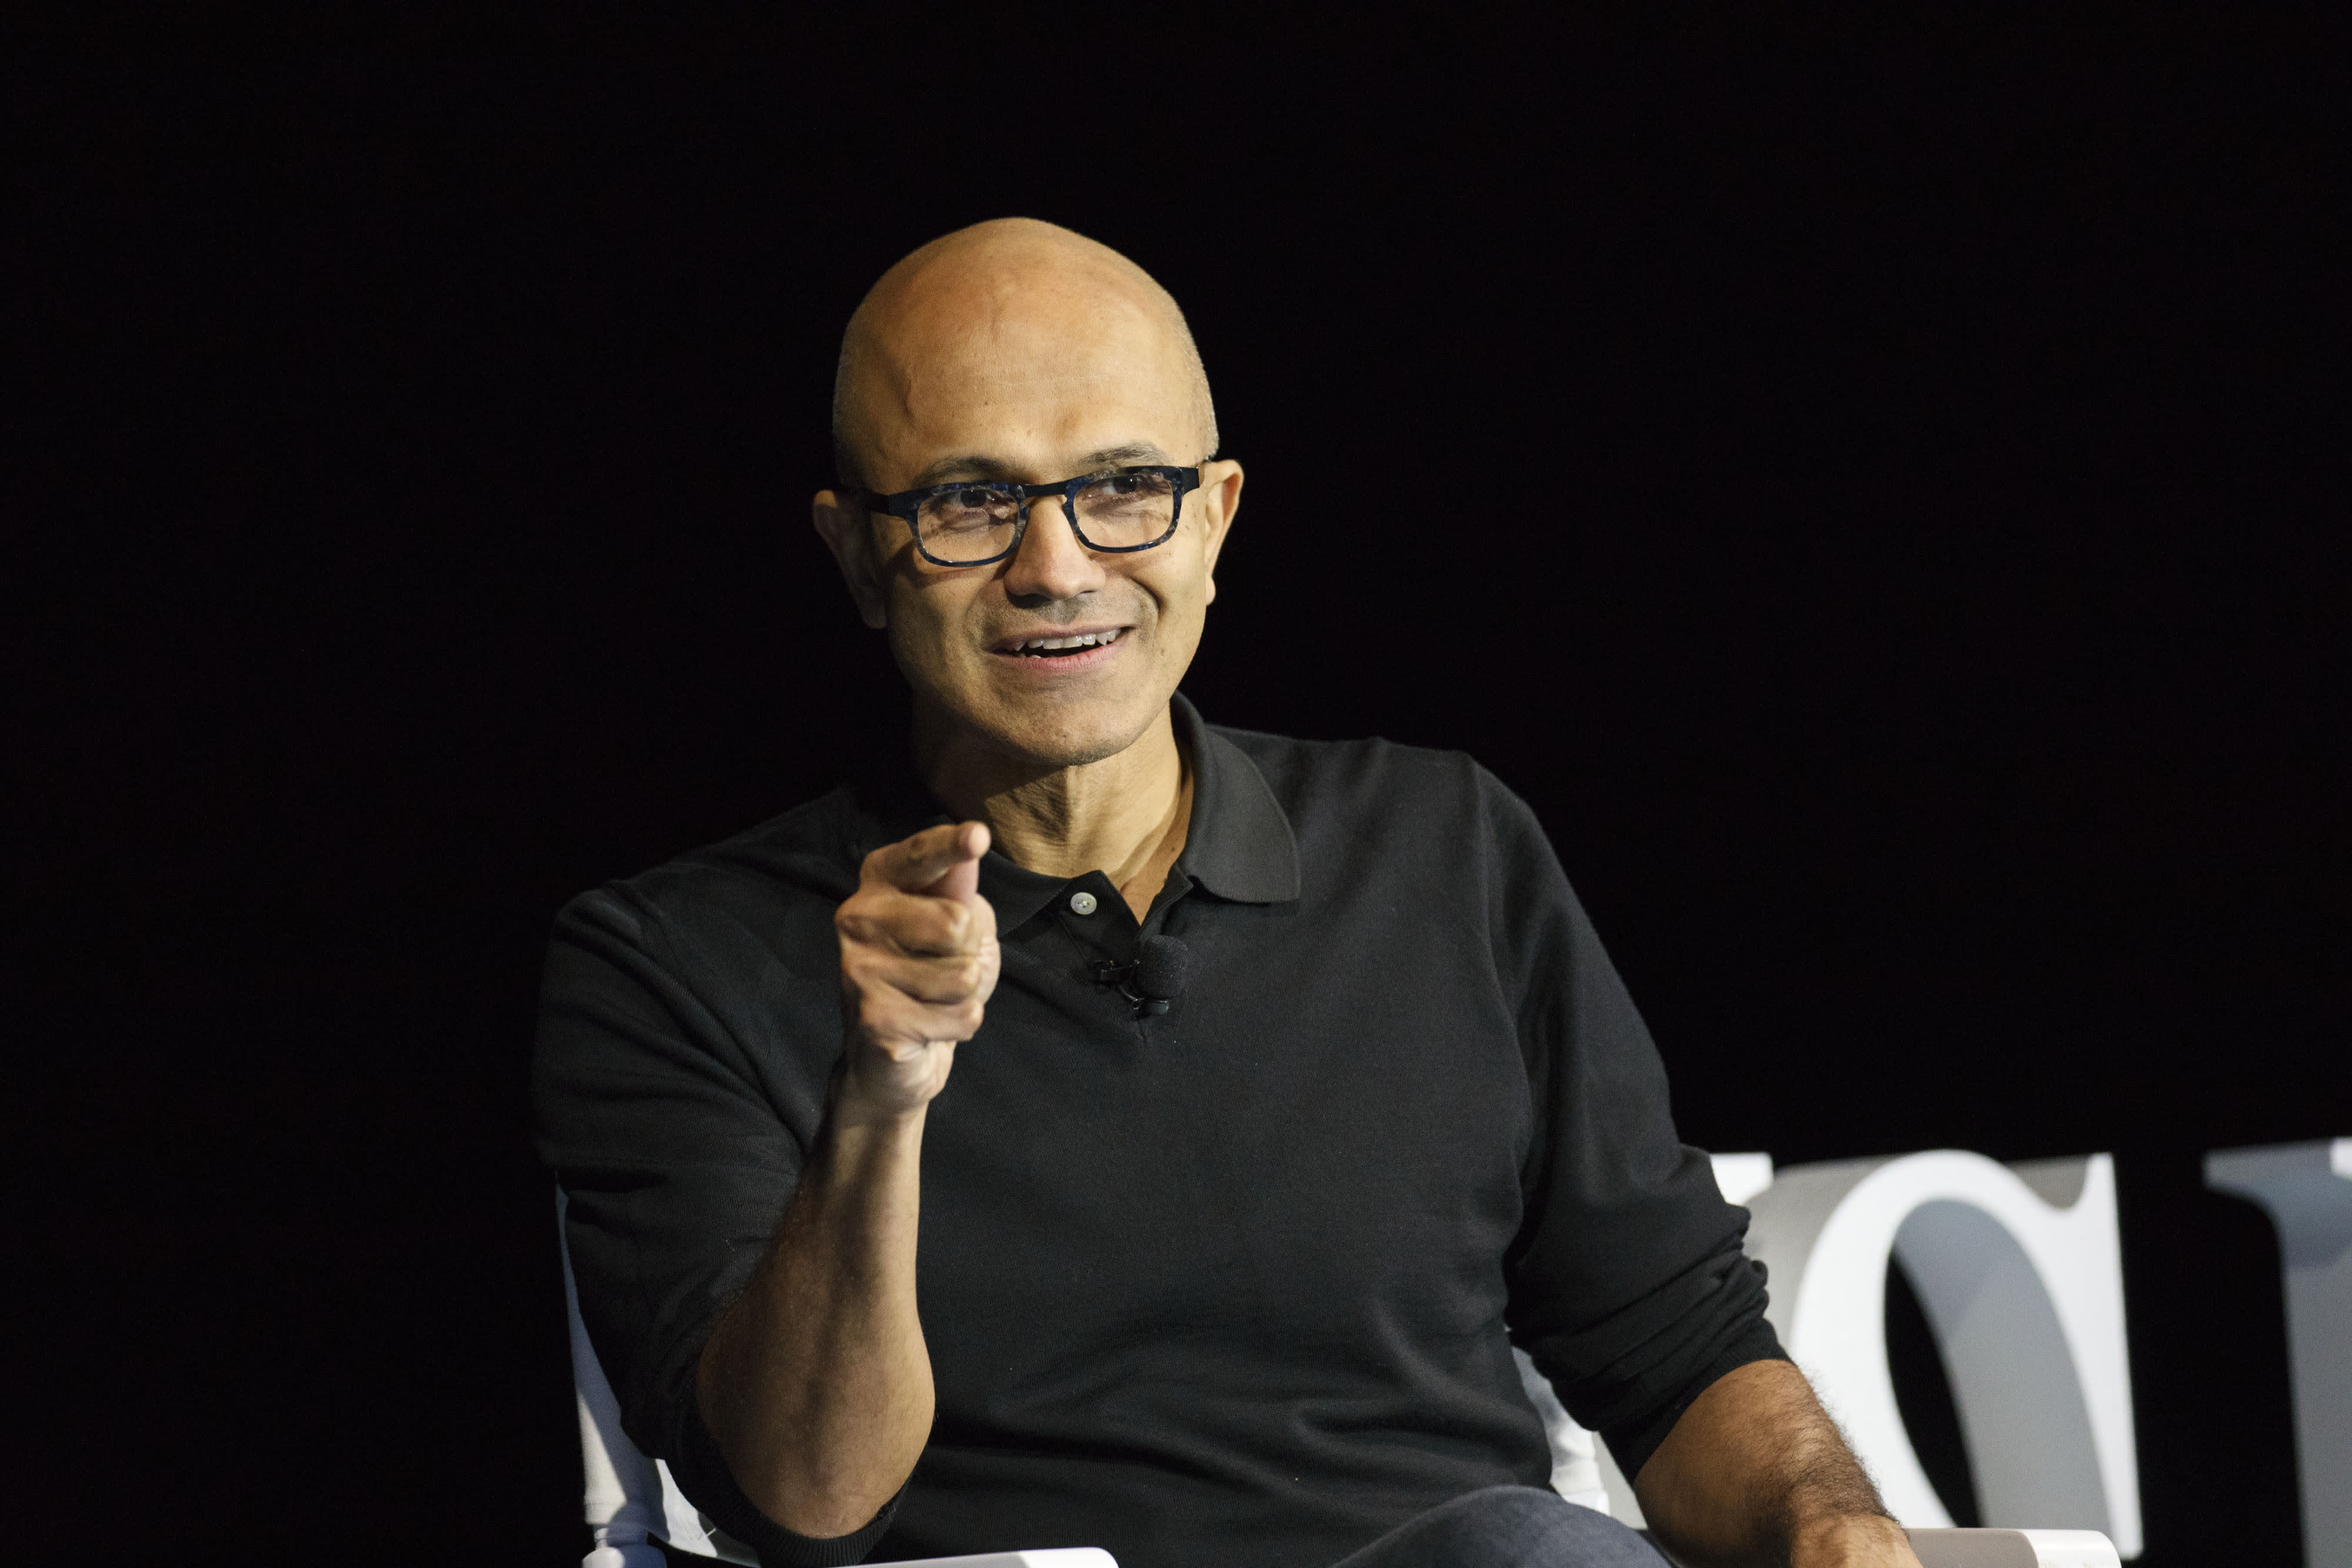 Microsoft Azure will move from Office to revenue in mid-2022: Piper Sandler